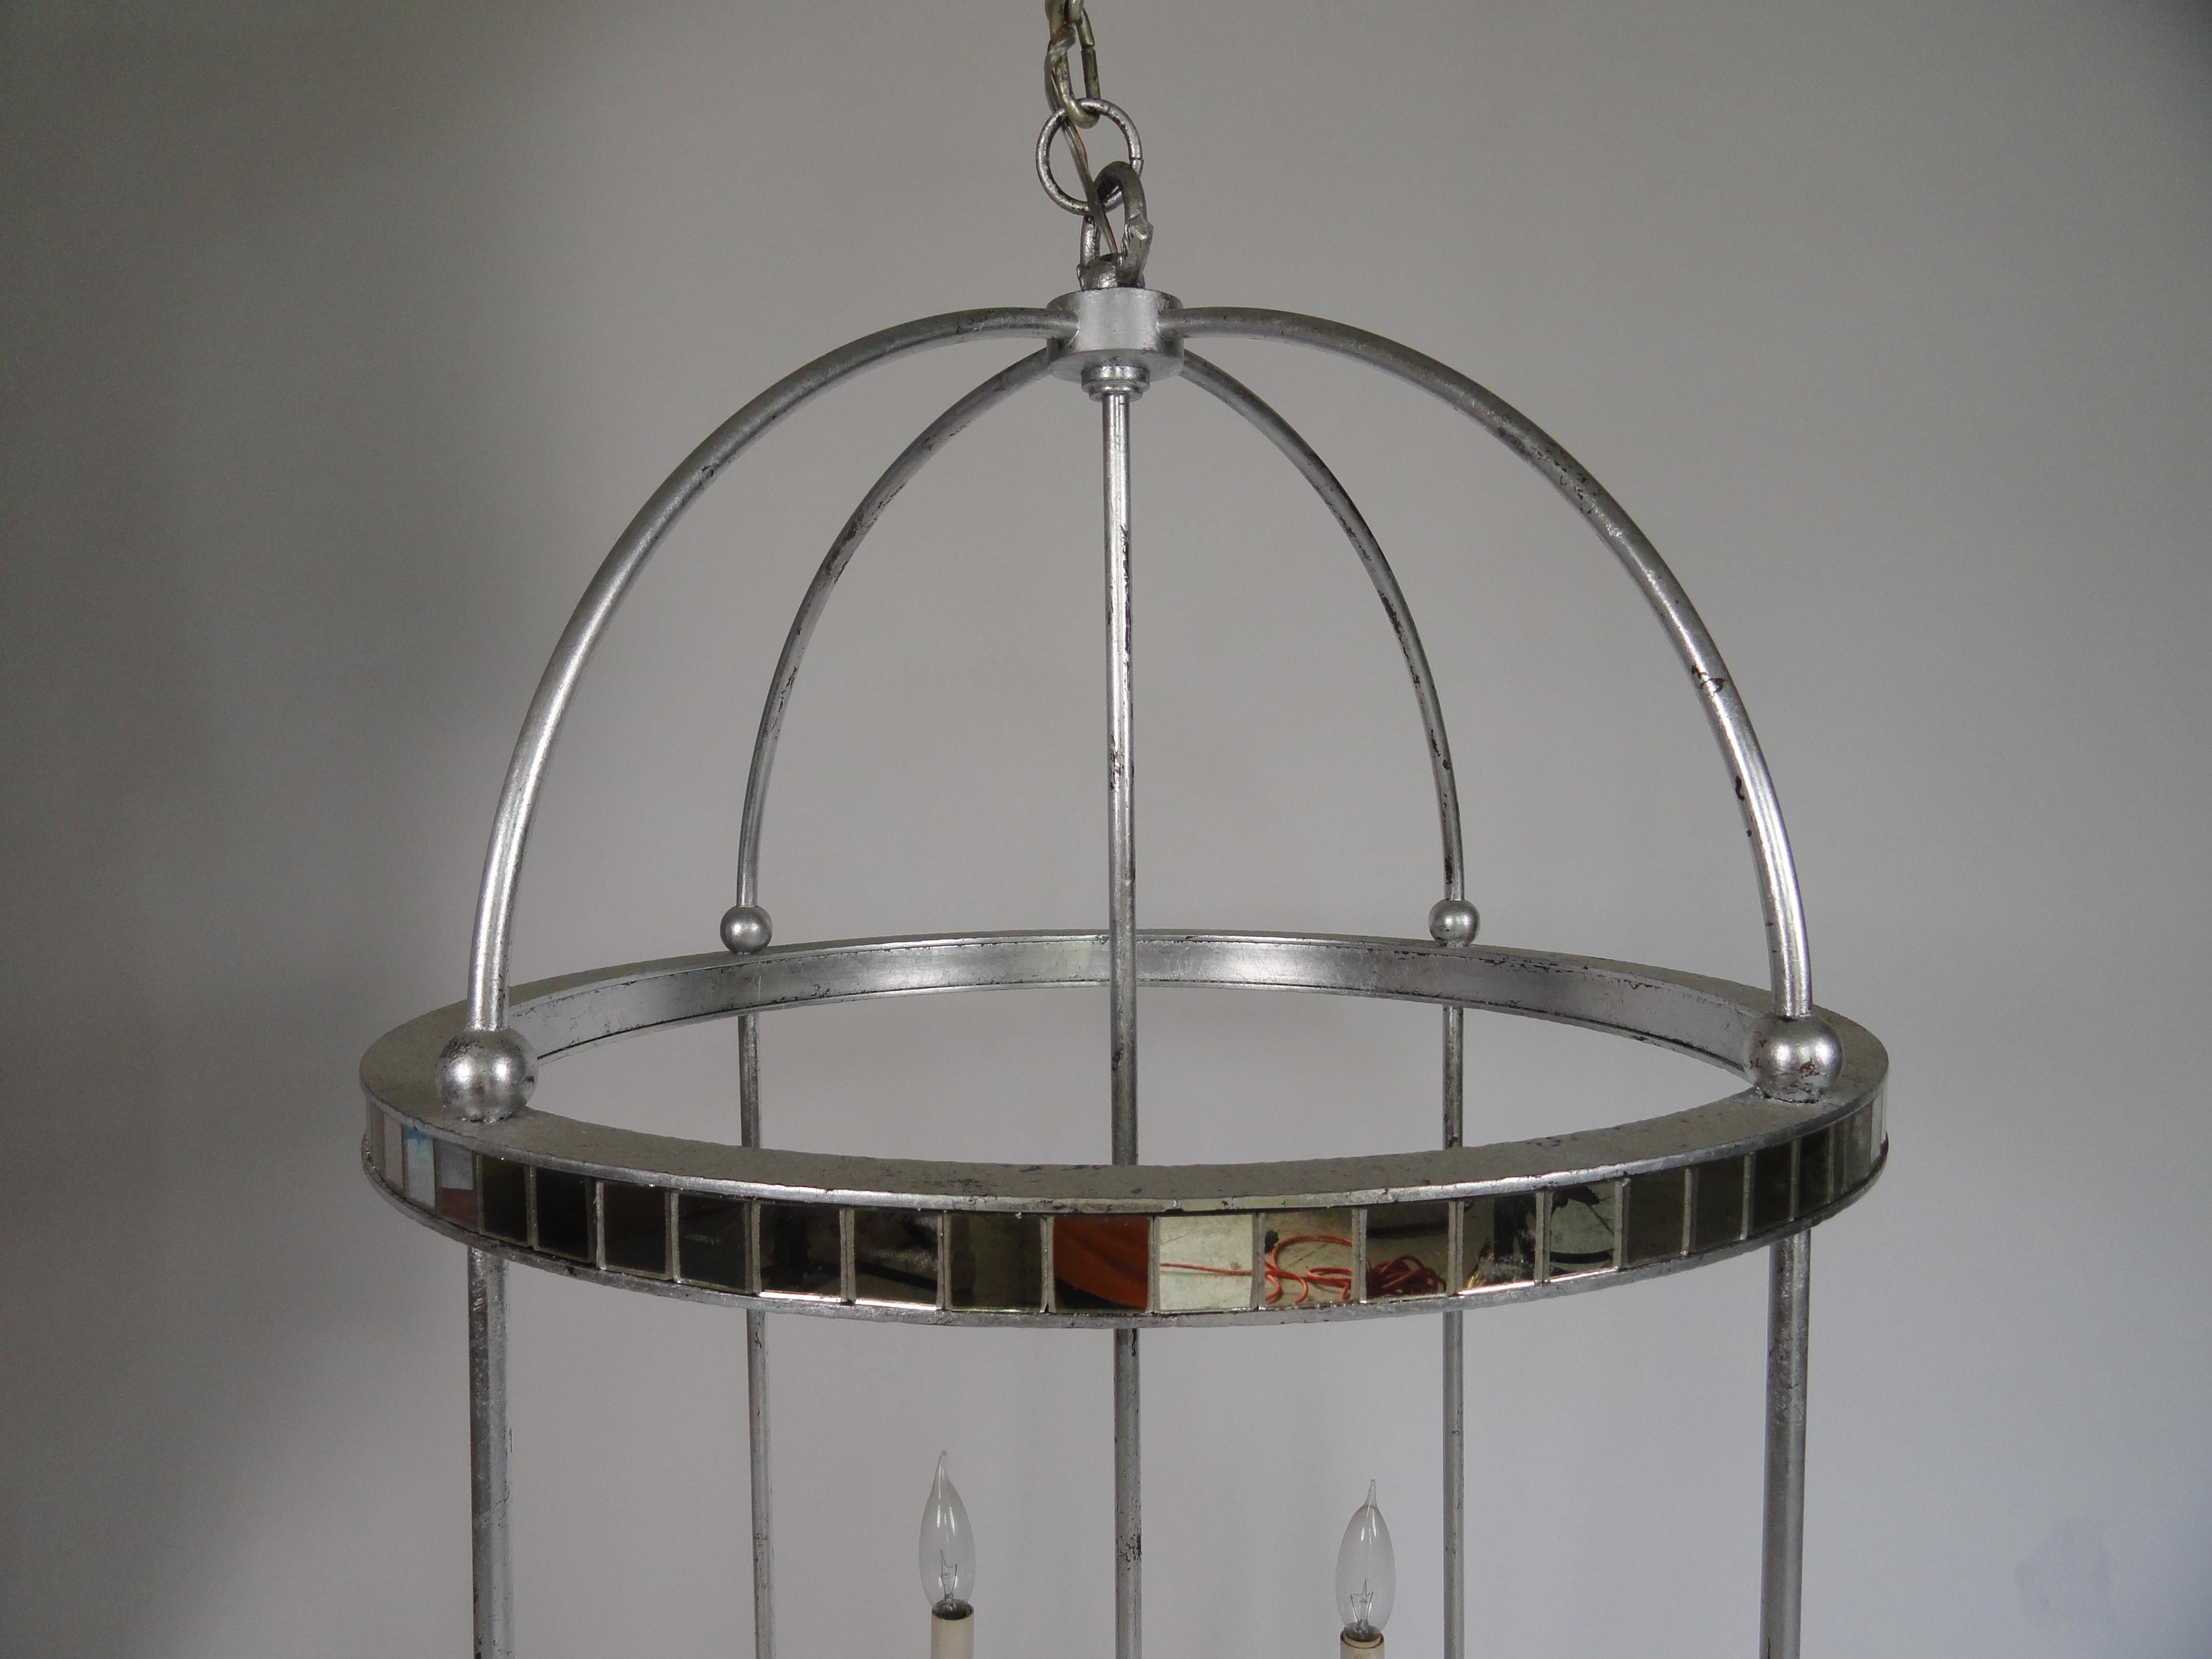 Late 20th century metal and mirror four-light chandelier in silver-leaf finish.
Measures: 46